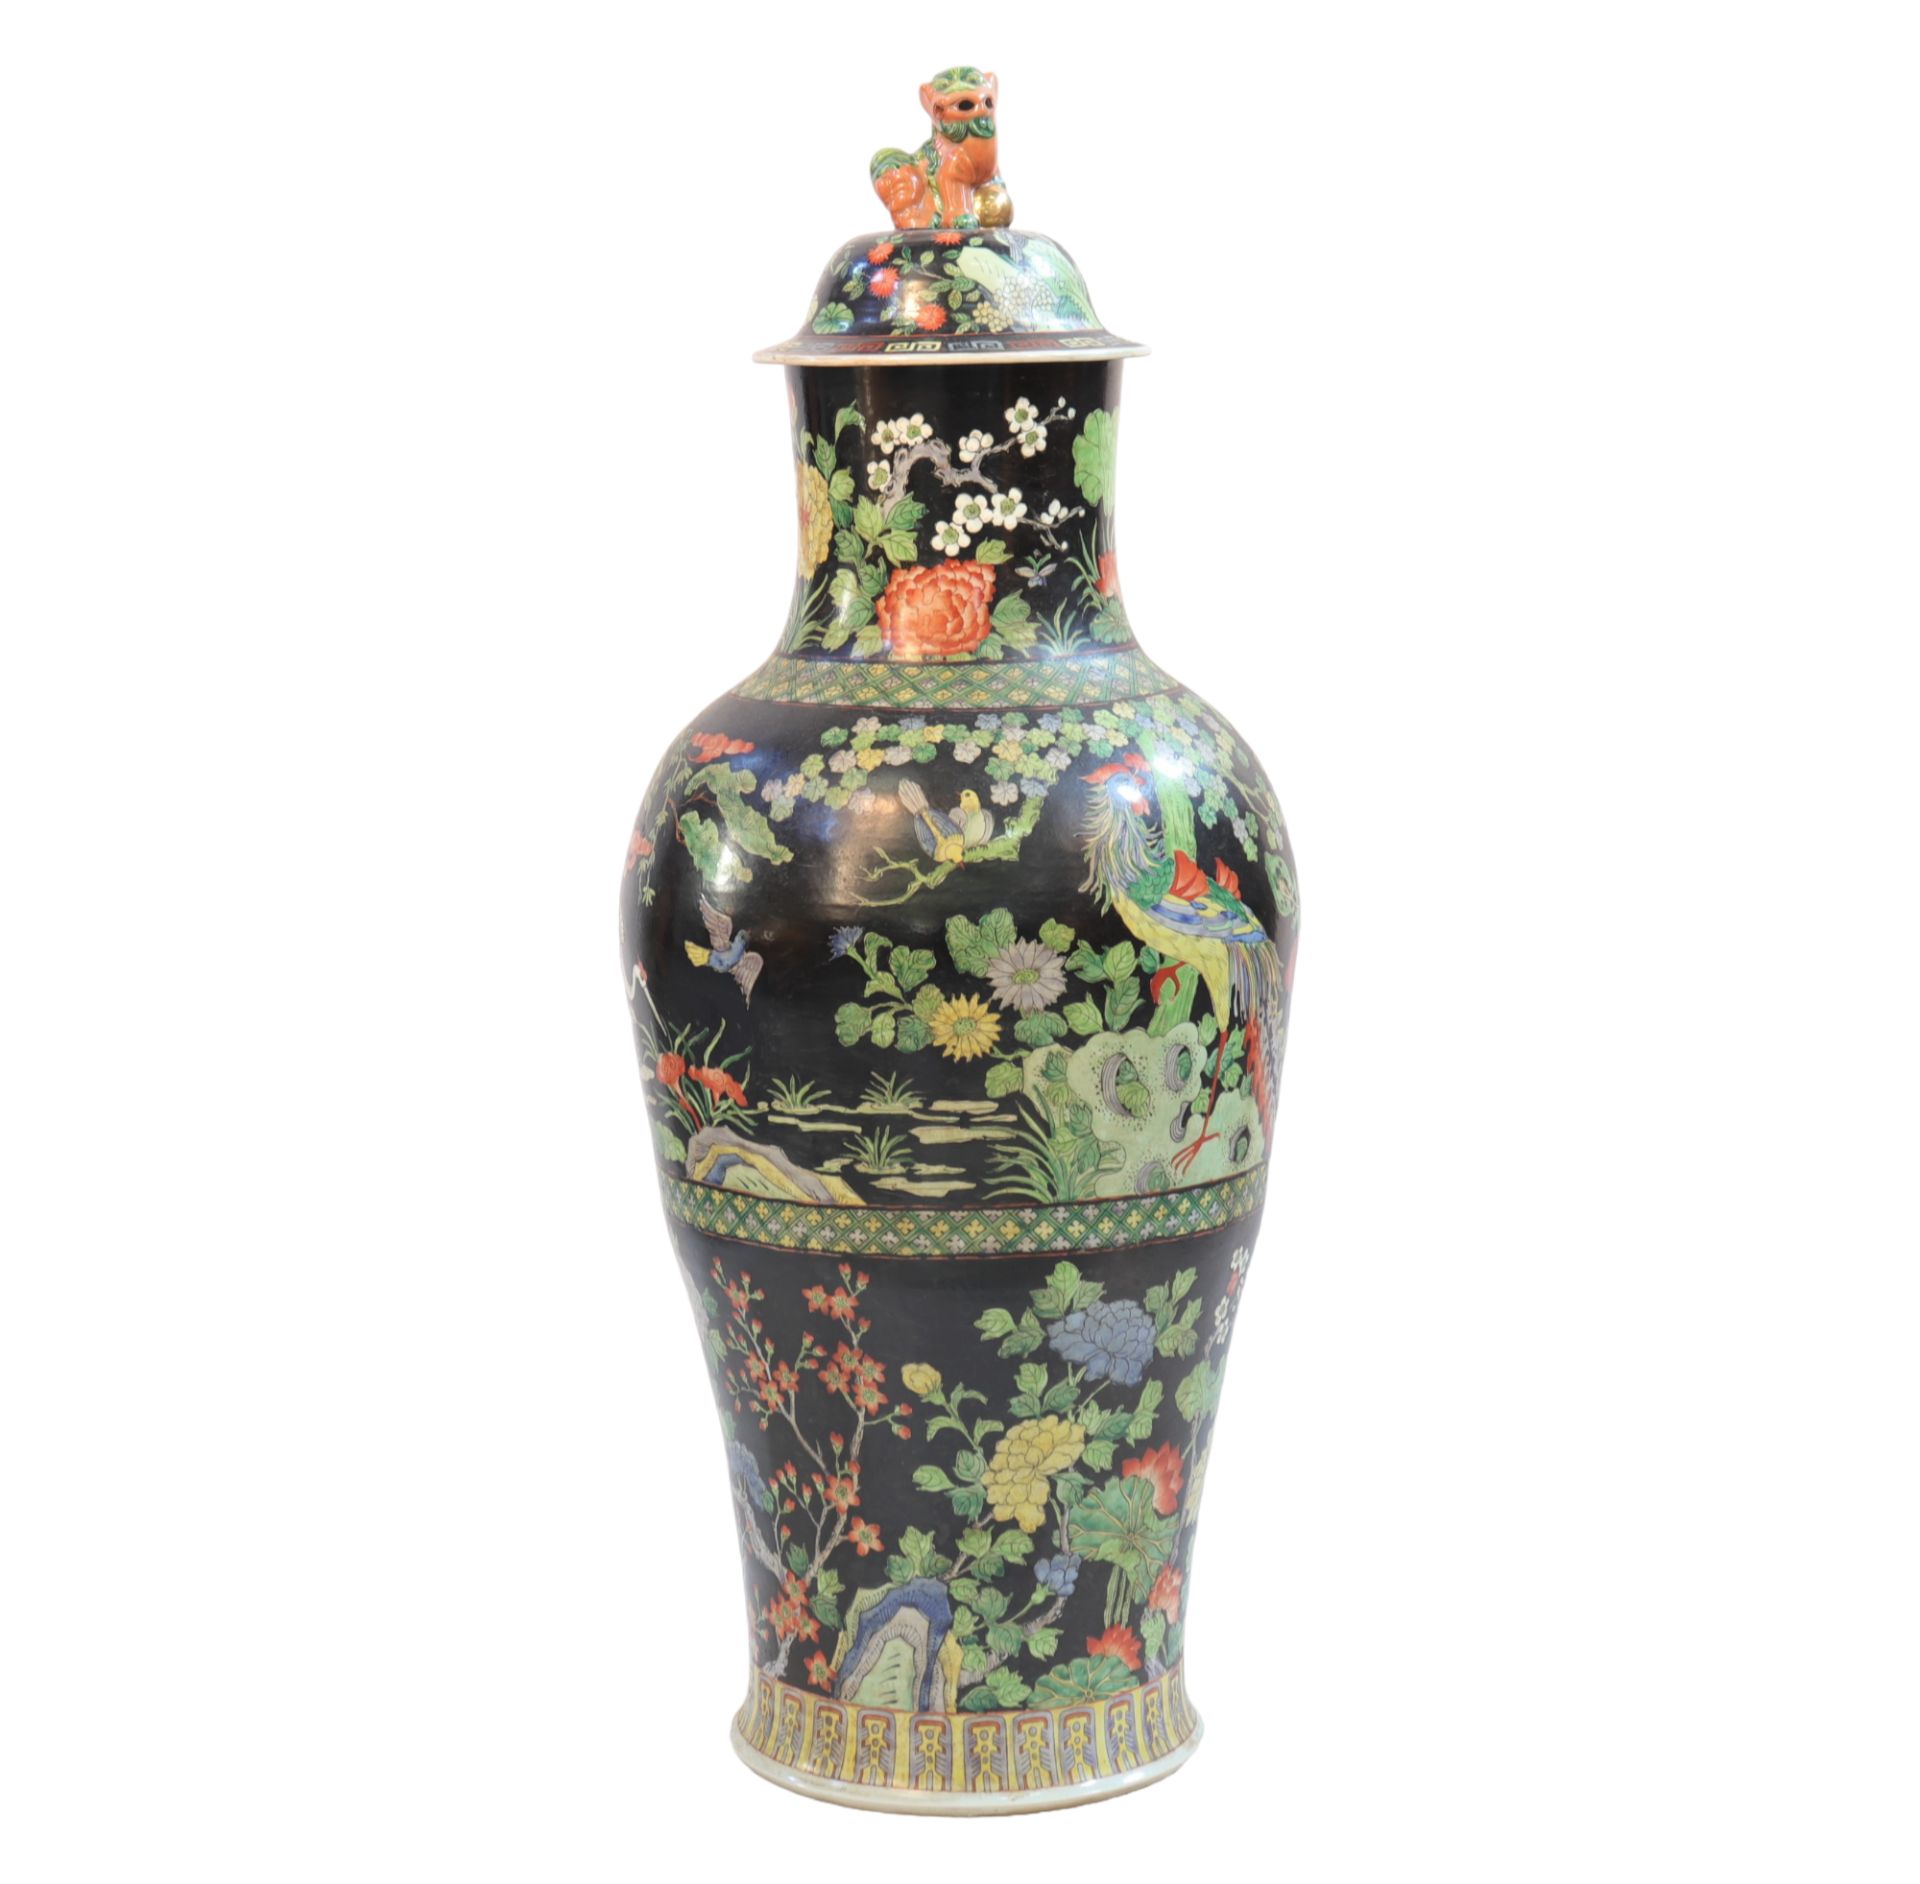 Covered vase from the Famille Noire decorated with flowers and birds from the 19th century - Image 5 of 5